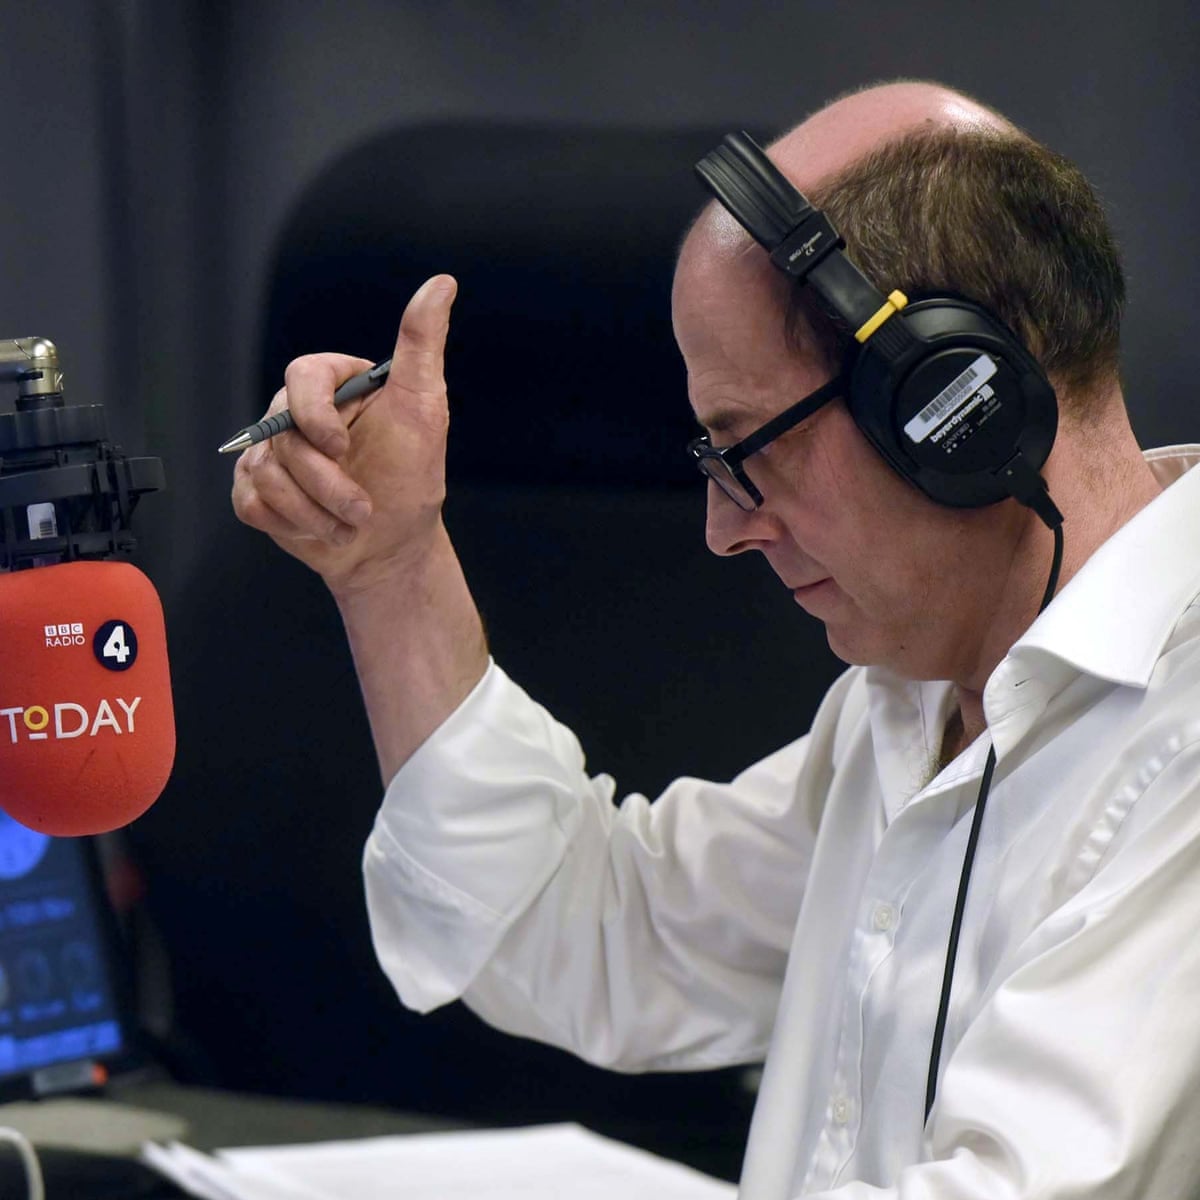 Times Radio Offering Big Money In Effort To Lure Bbc Presenters | Radio  Industry | The Guardian